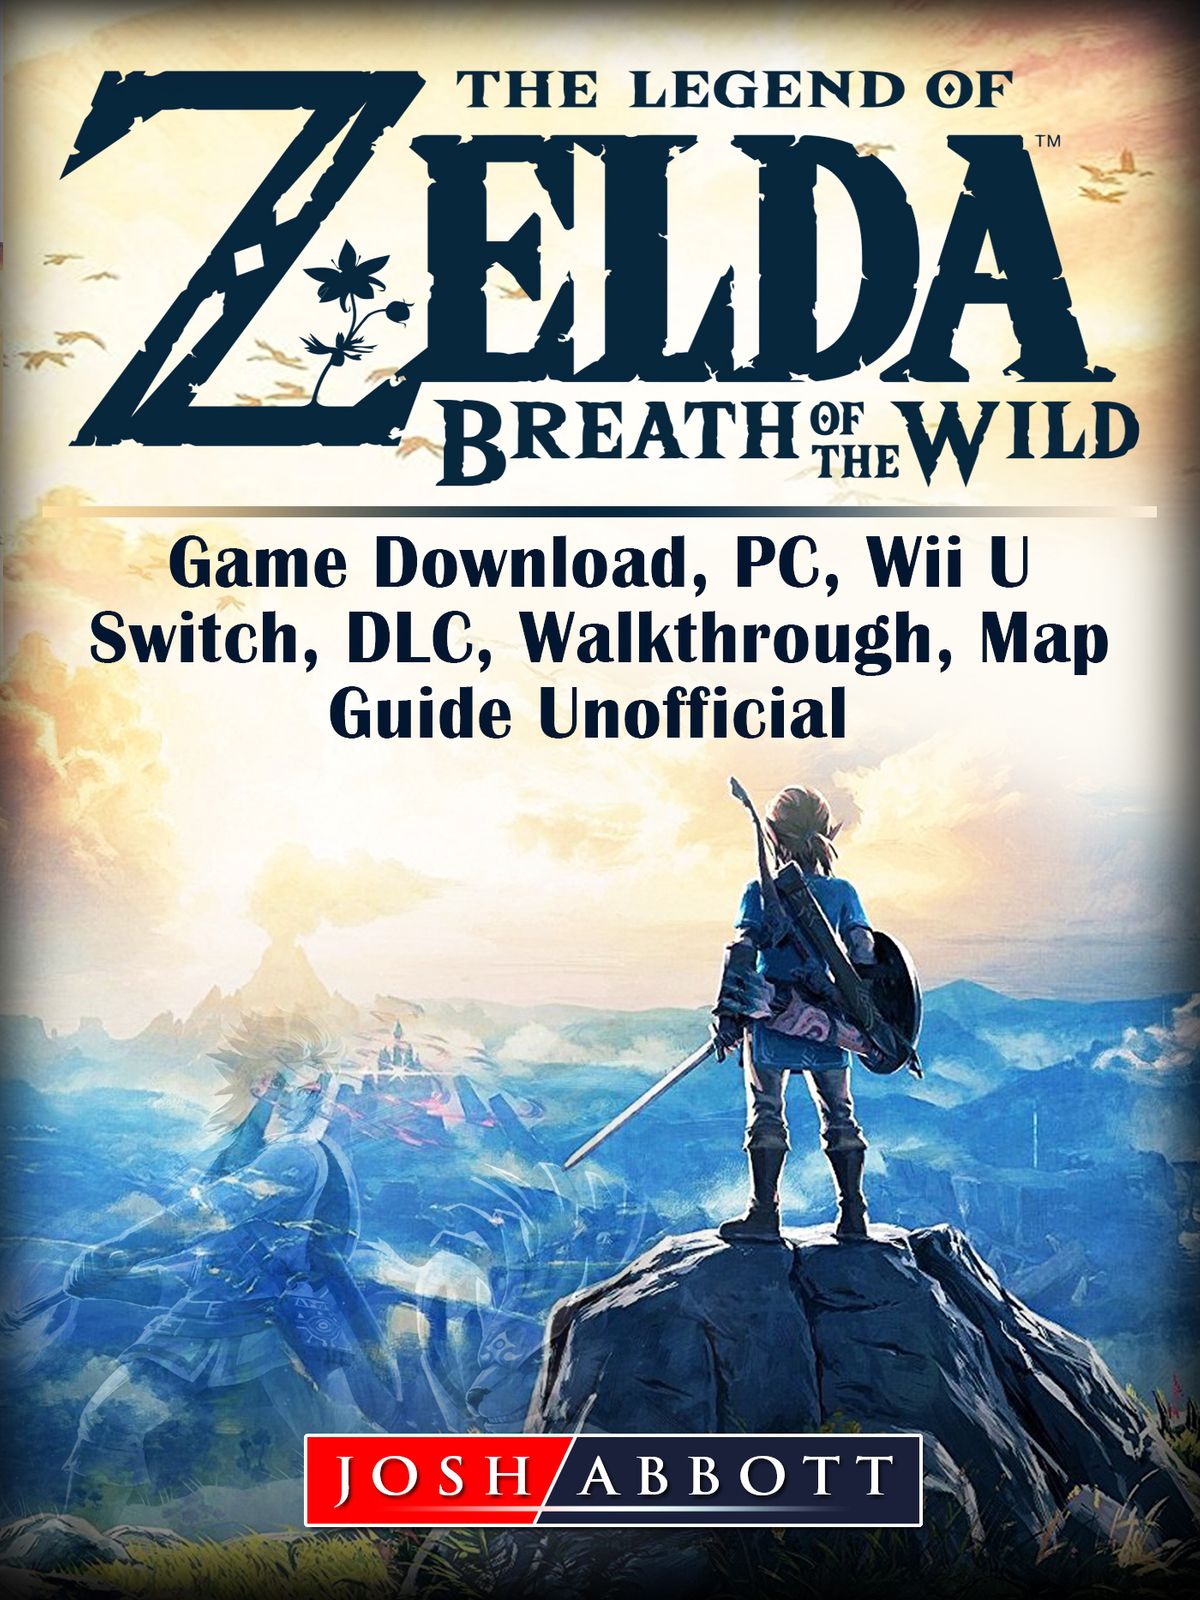 breath of the wild rom download